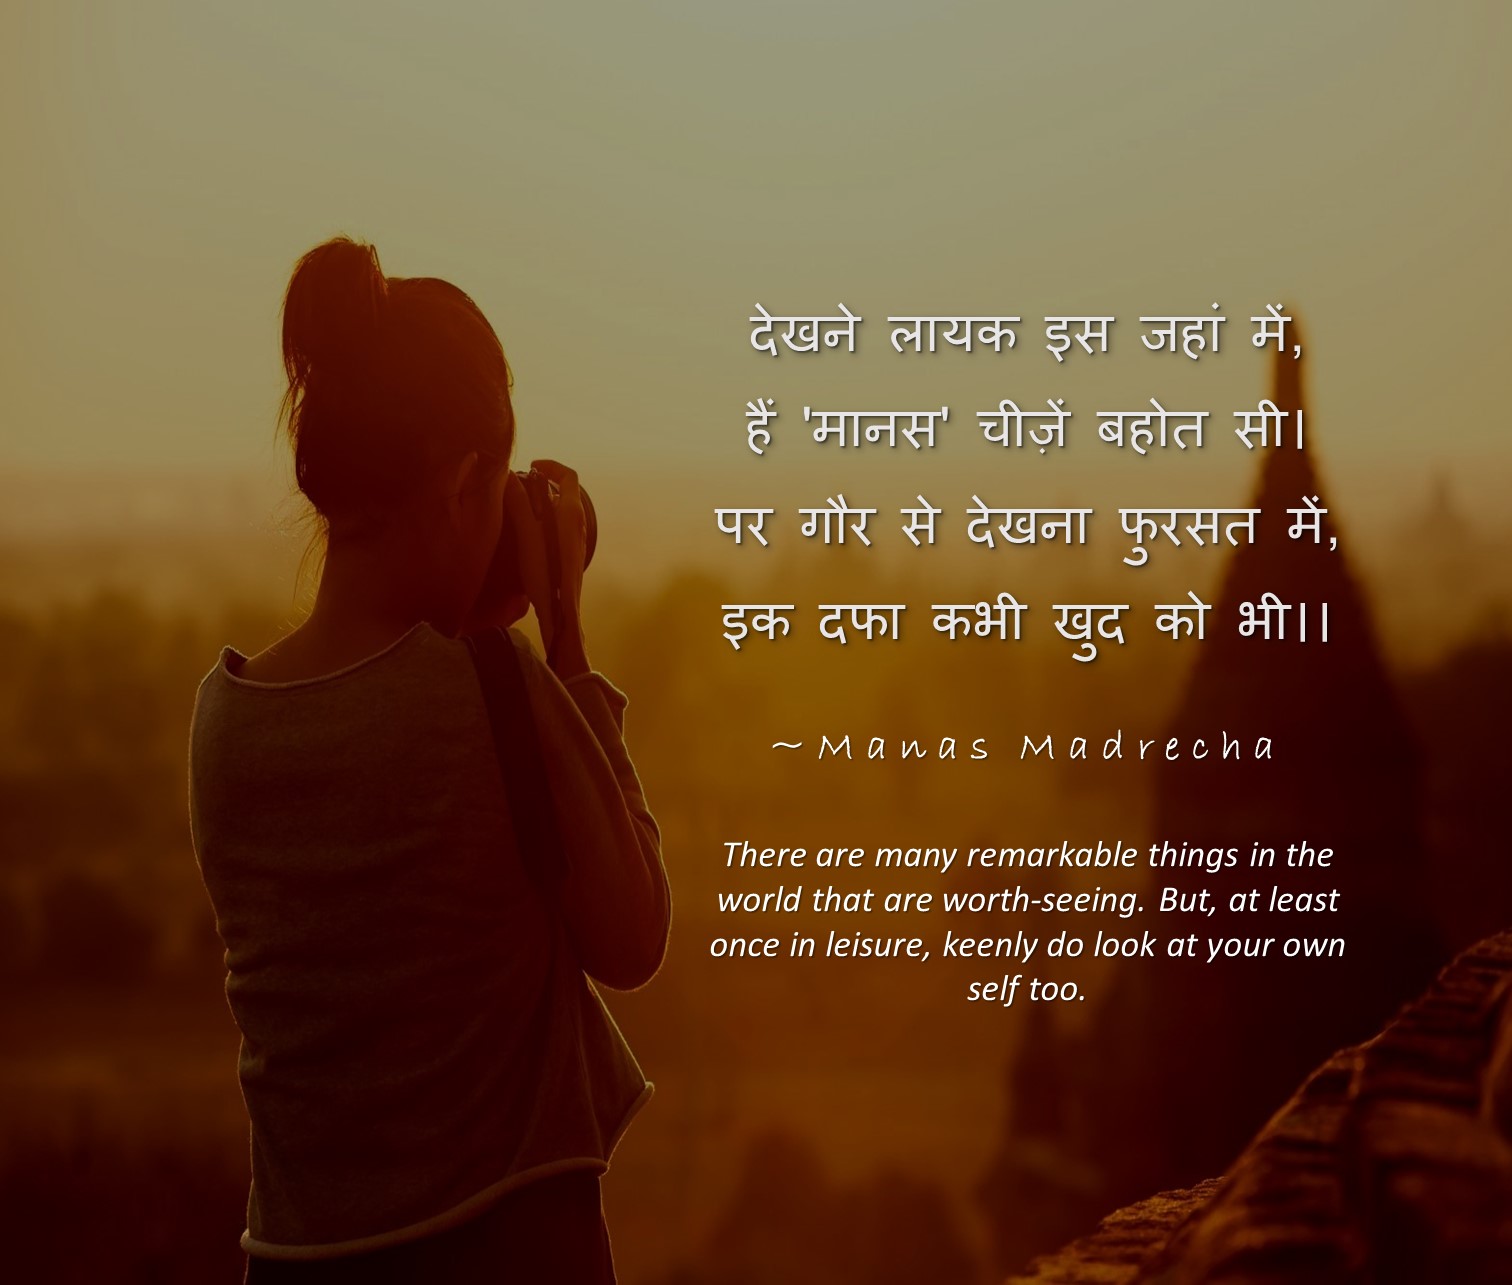 First talk about your self - Hindi Poem | Manas Madrecha blog